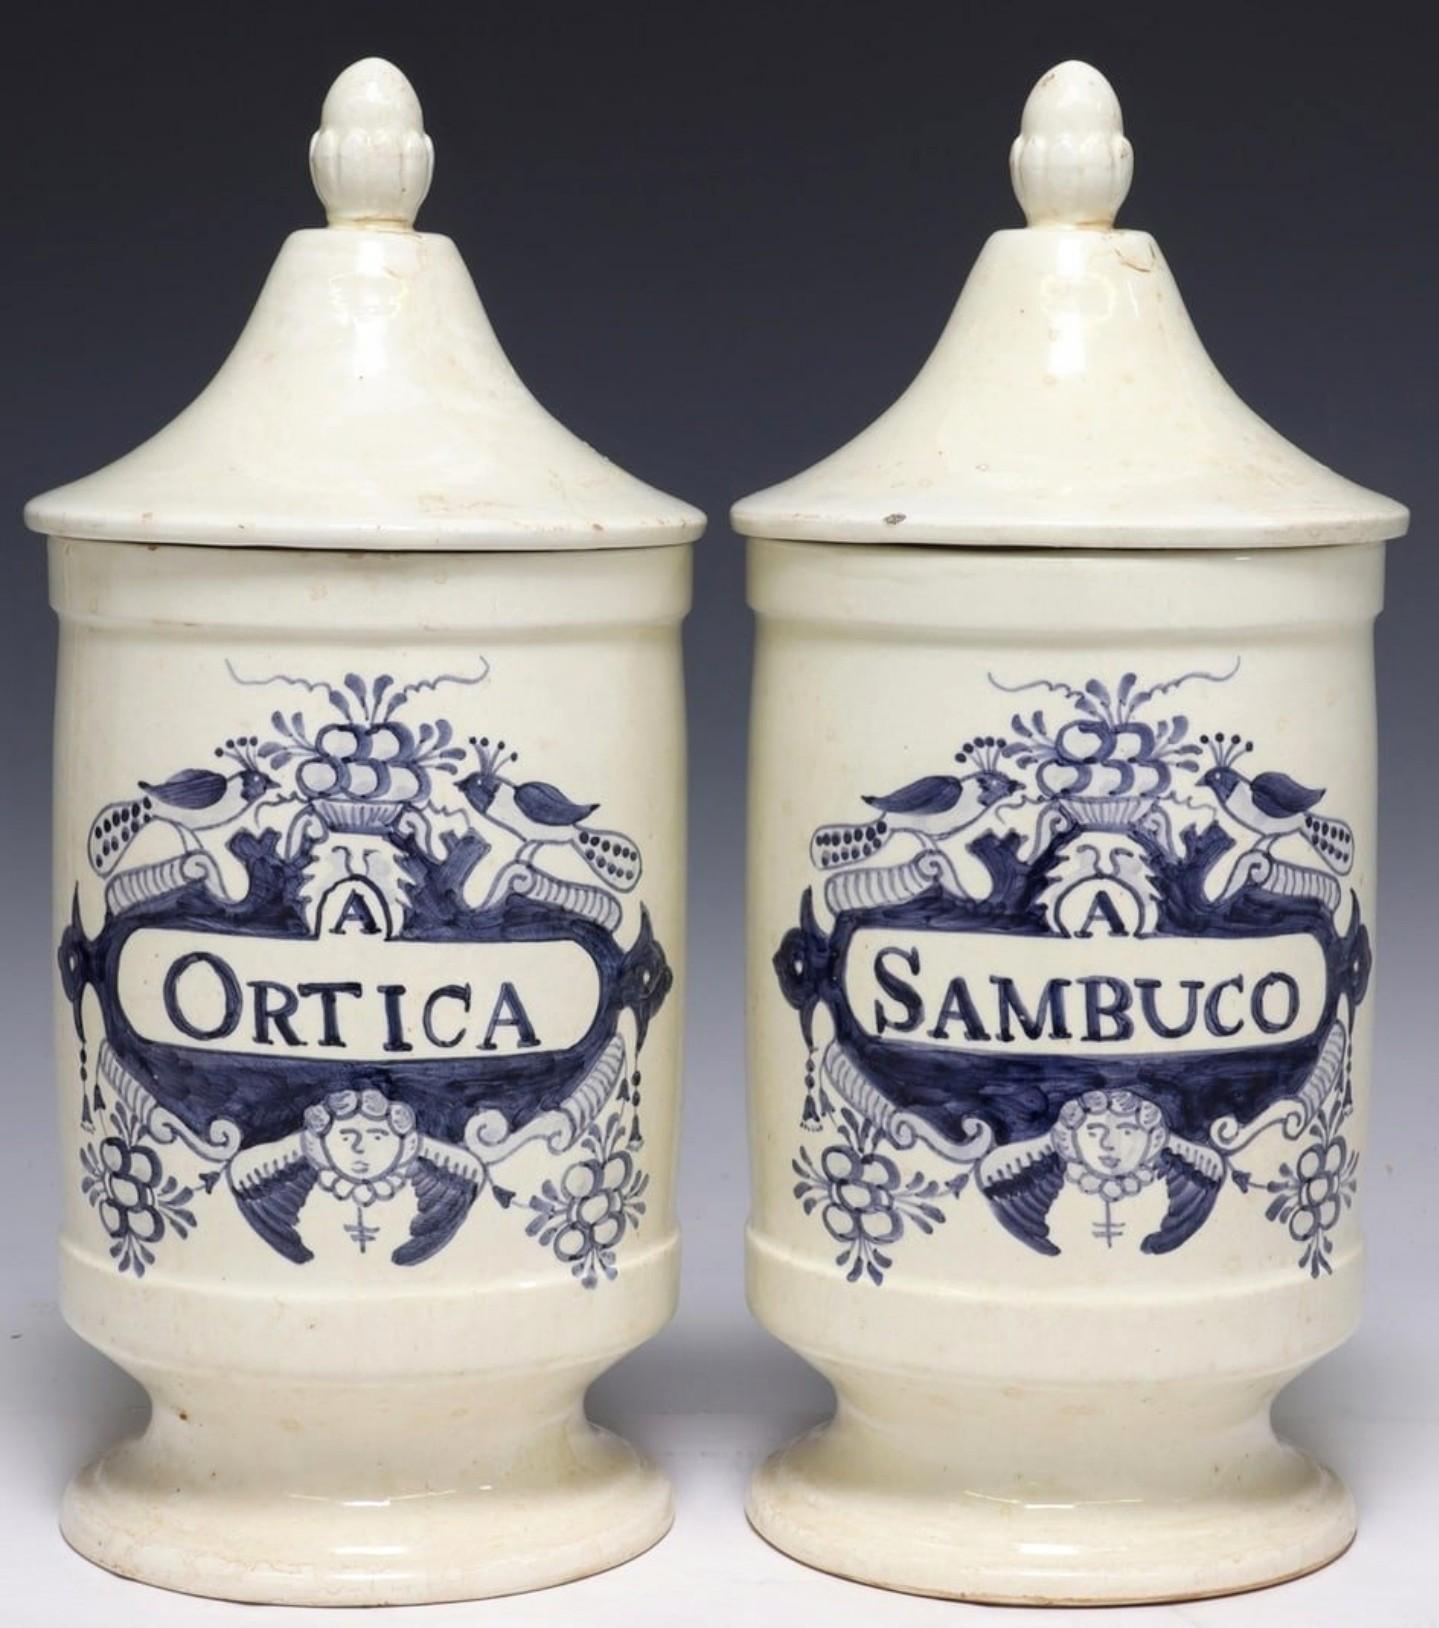 A remarkable pair of two antique European tin-glazed earthenware apothecary jars. circa 1770

Originally used as medicinal pottery jars that held ointments and dry drugs at apothecaries and pharmacies, these 18th century Italian blue and white